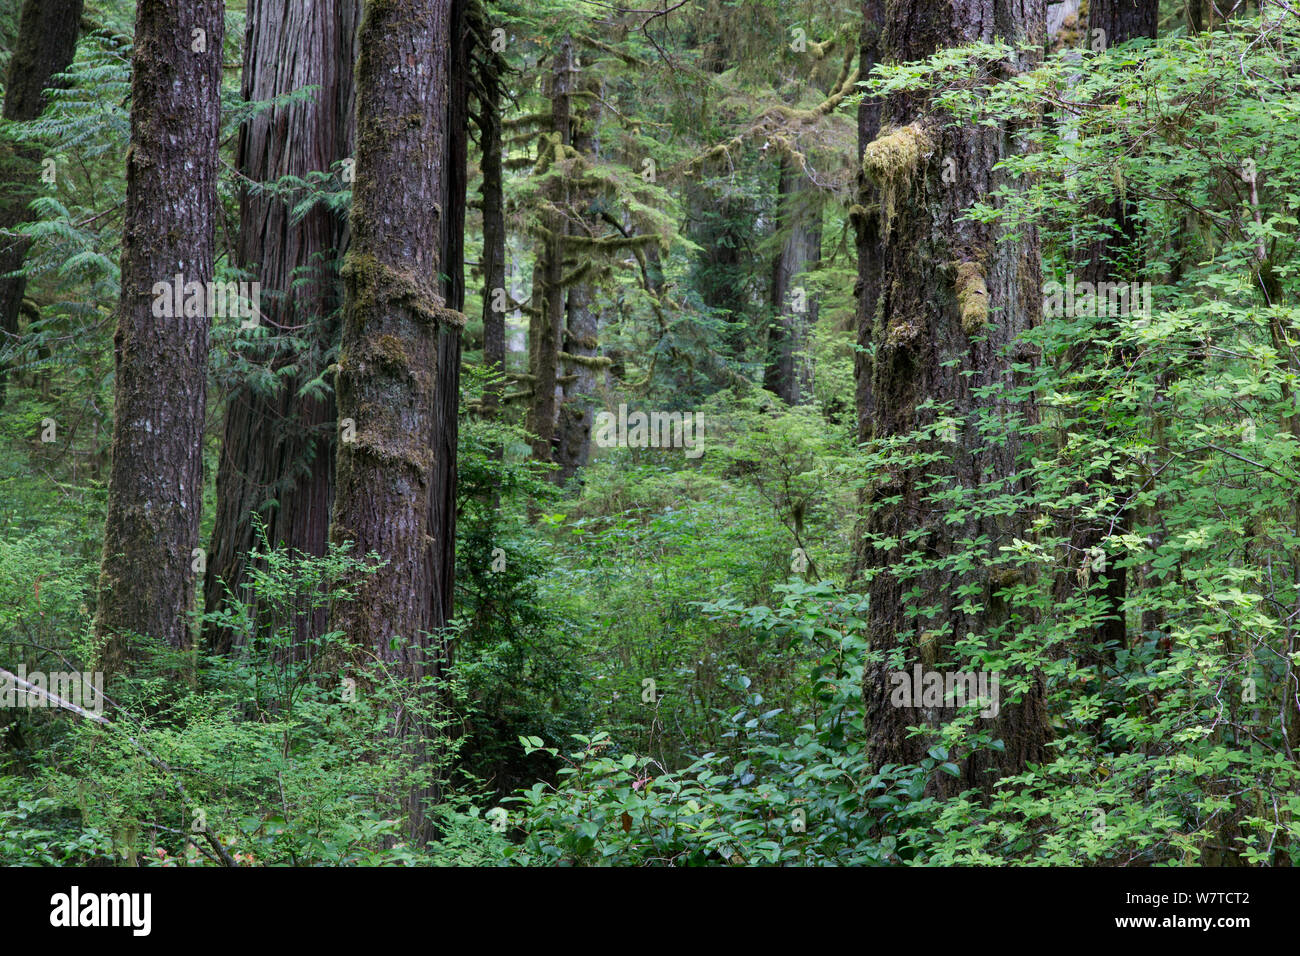 Temperate rainforest with ancient Red cedar trees (Thuja plicata). Pacific Rim National Park, Vancouver Island, British Columbia, Canada, August. Stock Photo